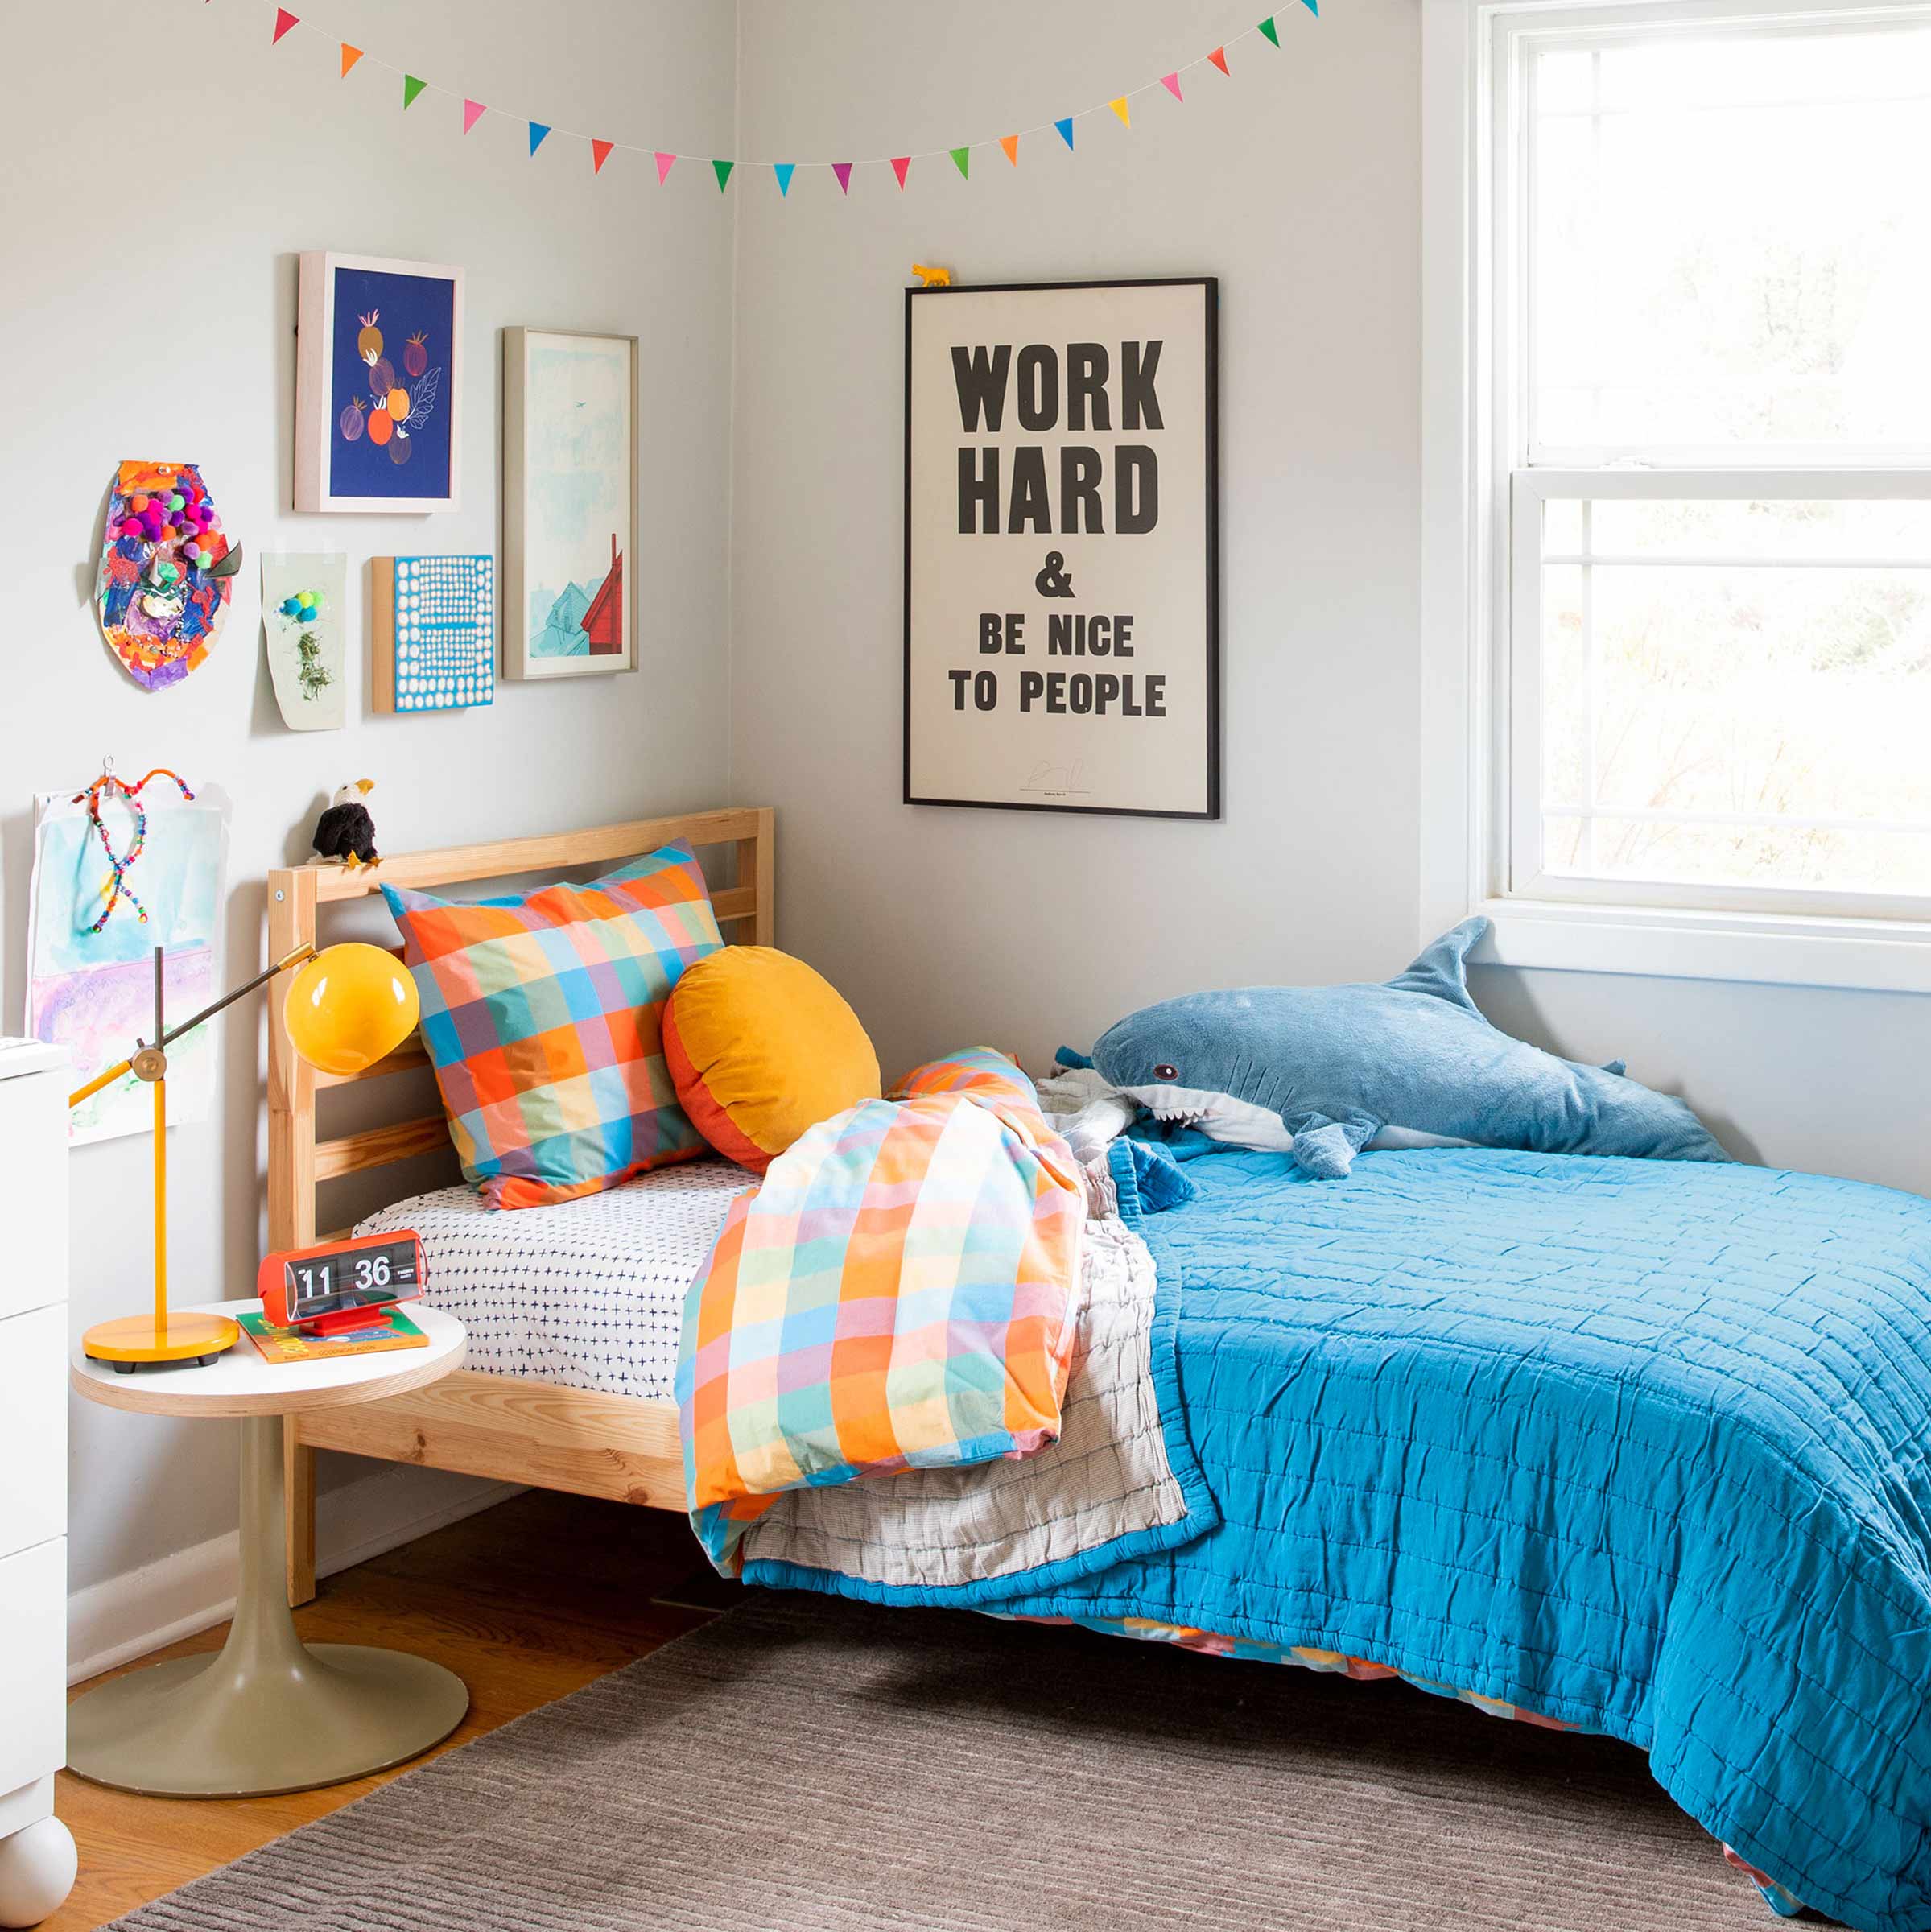 A bright kid's bed with plaid bedding.